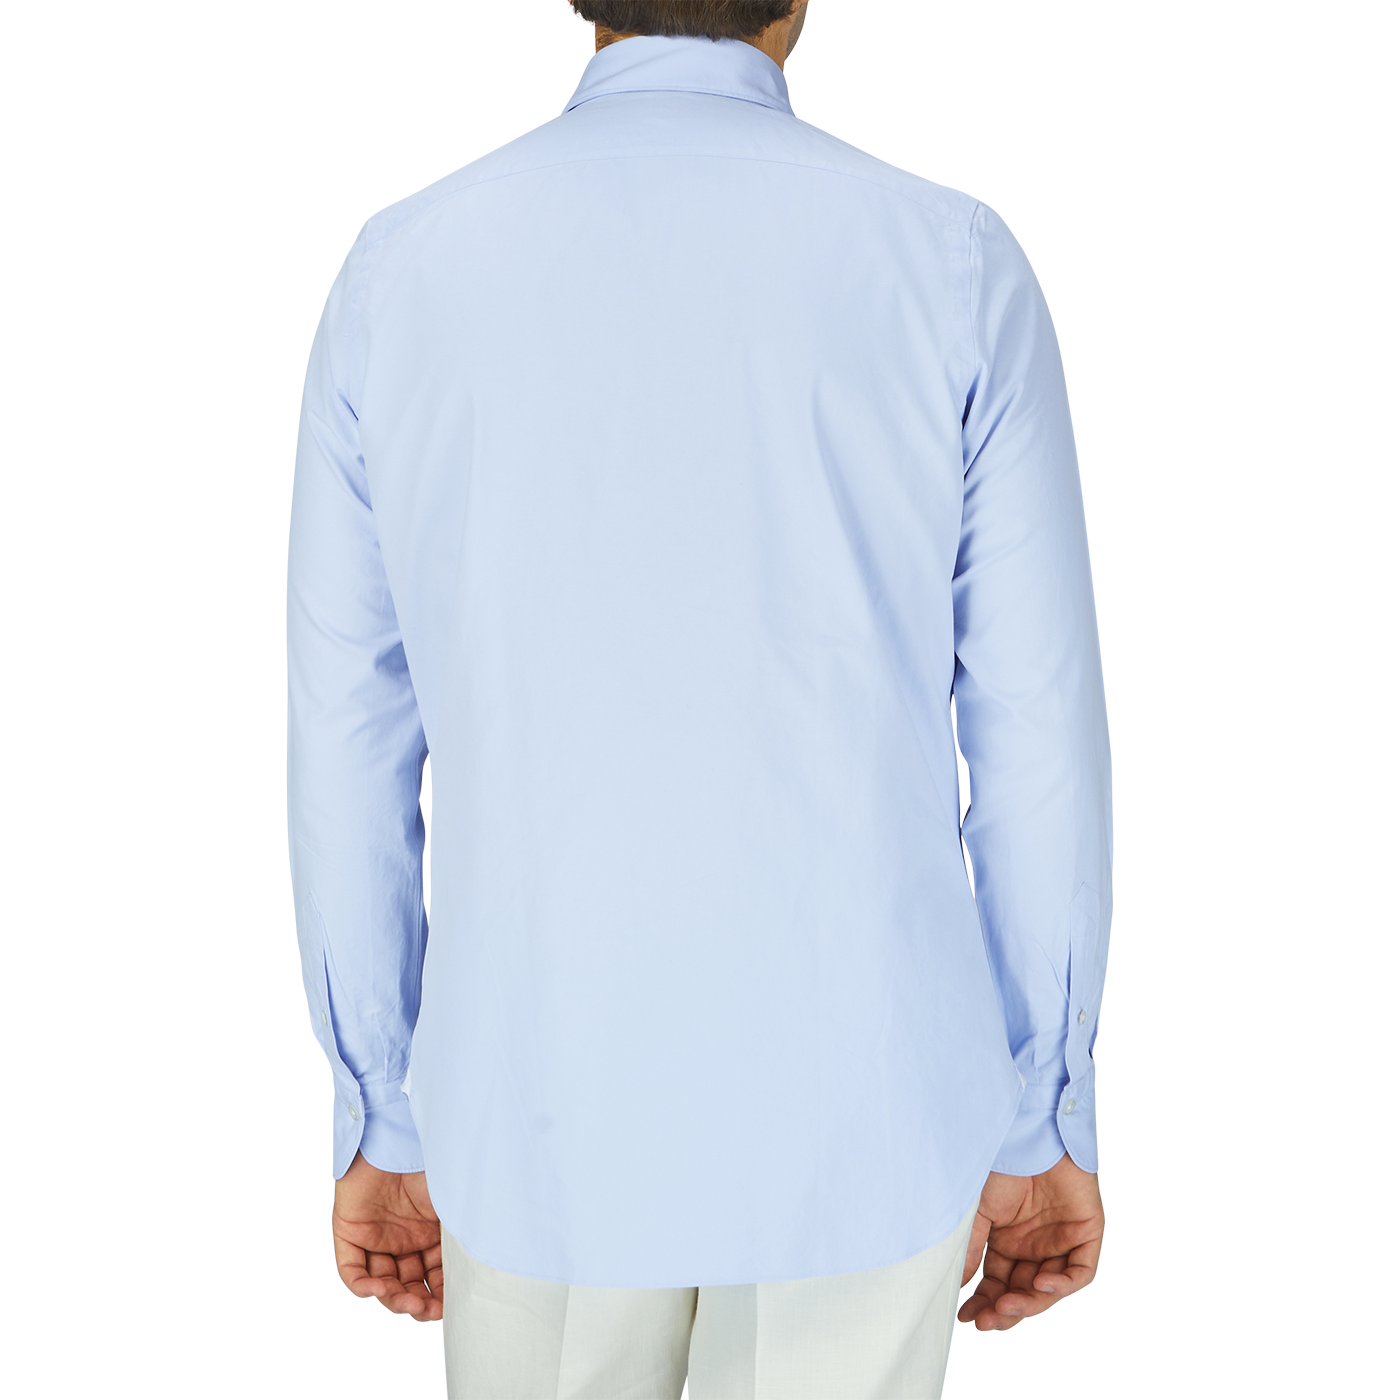 A man wears a Light Blue Washed Cotton Twill shirt by Finamore.